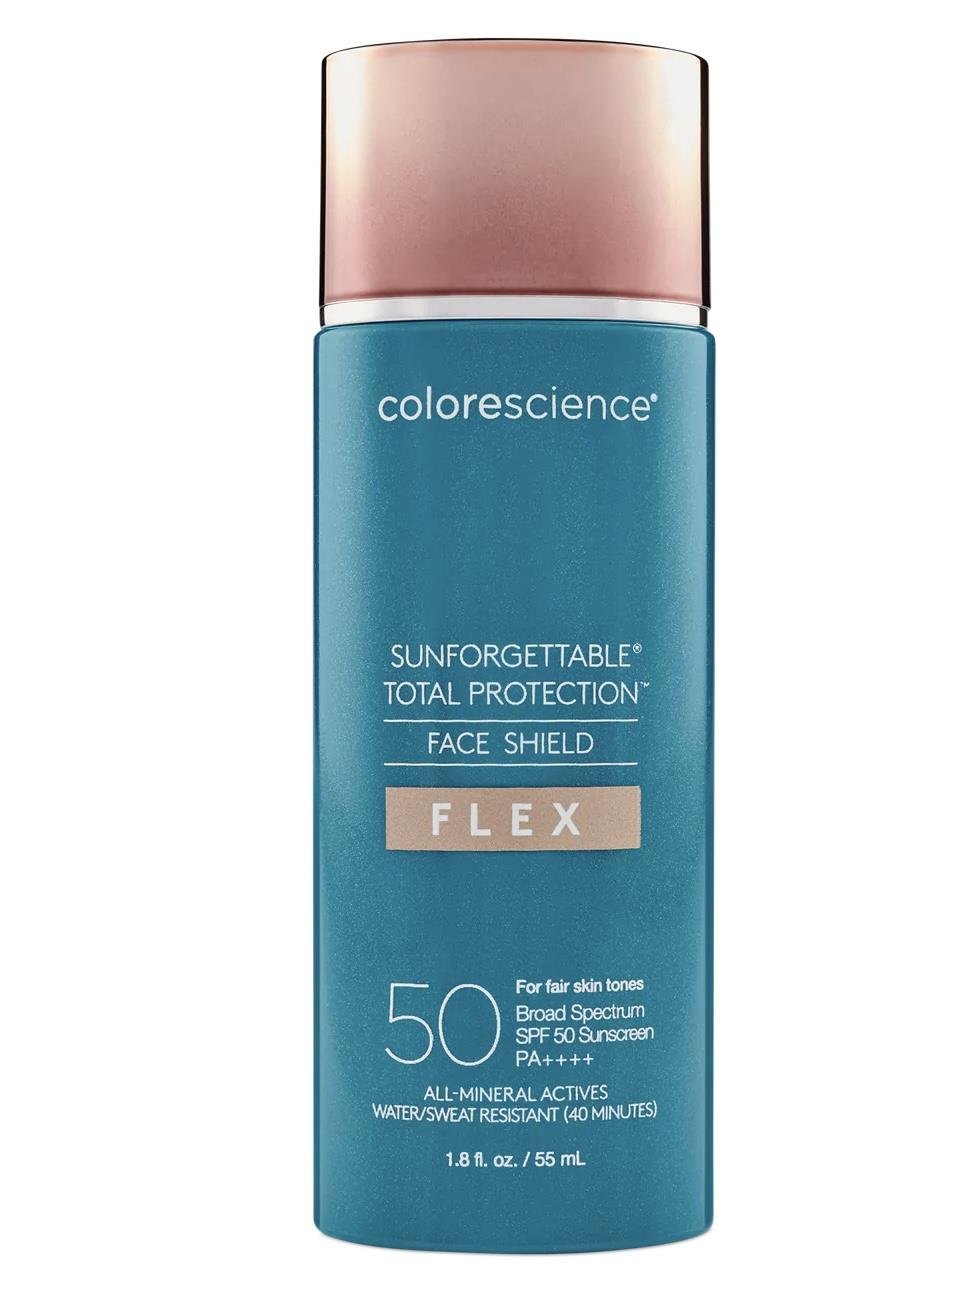 Colorescience Sunforgettable Total Protection Face Shield Flex SPF 50 Fair - SkinLab USA